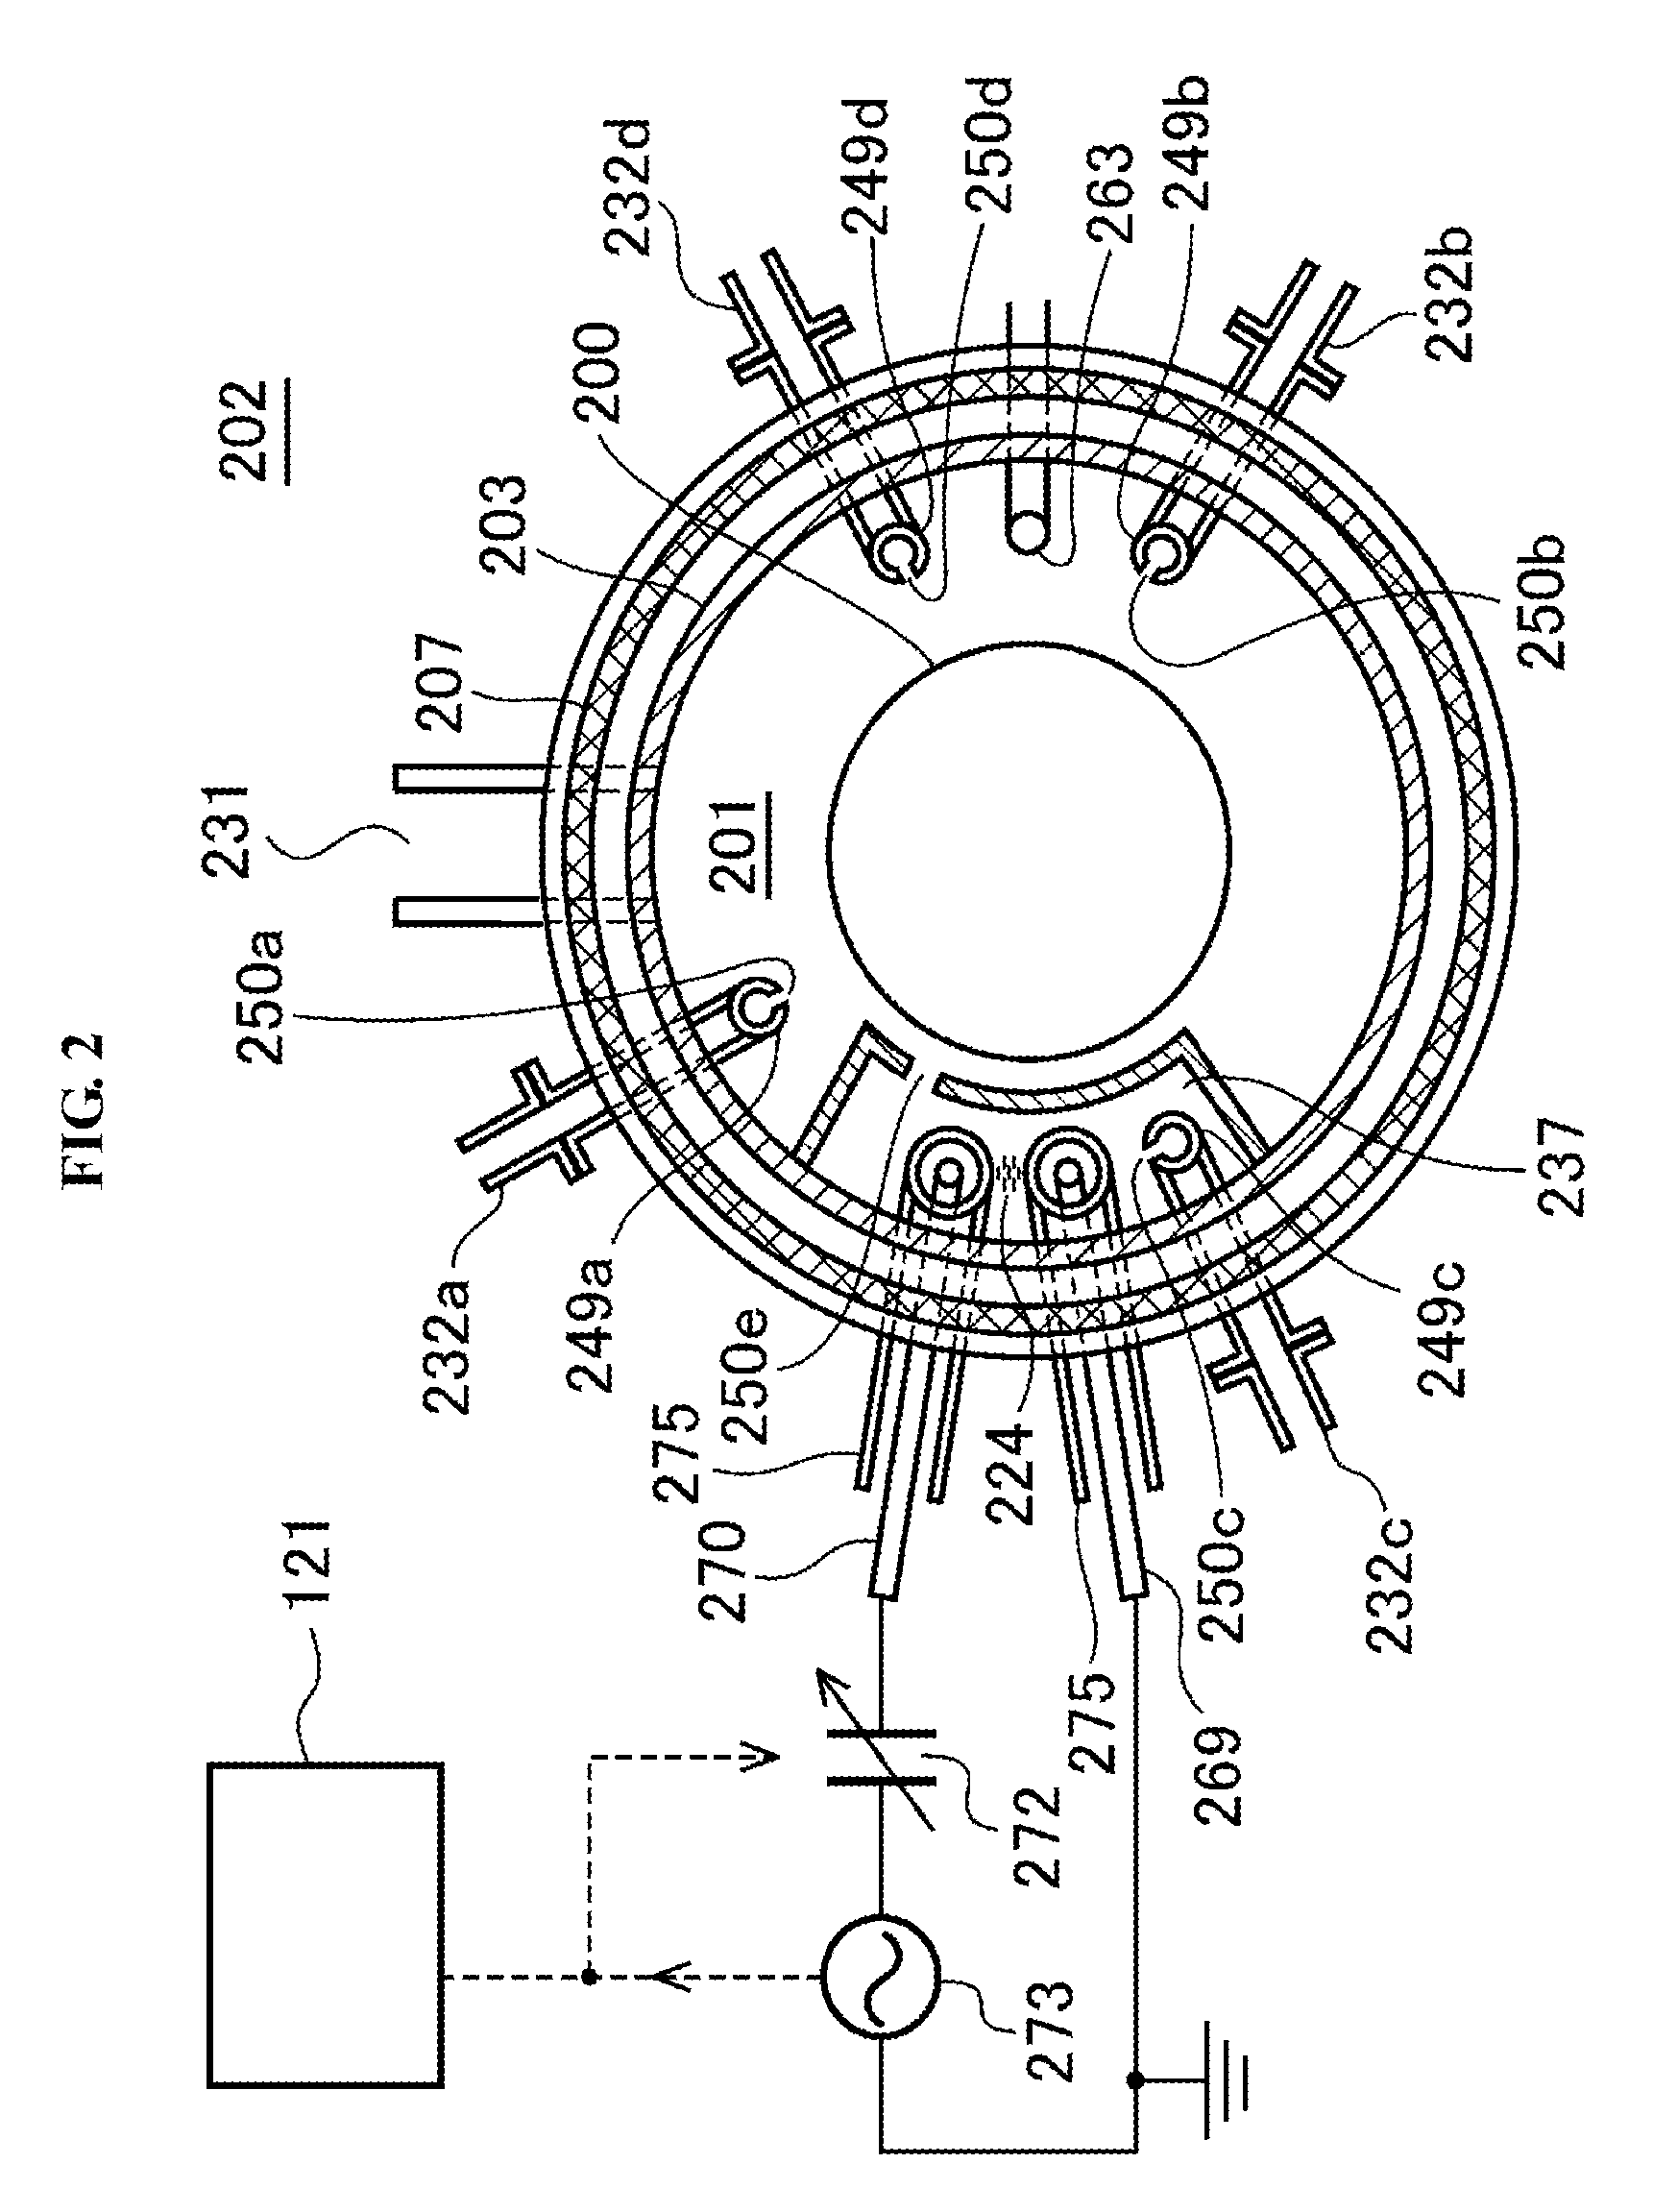 Method of manufacturing semiconductor device, substrate processing apparatus and non-transitory computer-readable recording medium